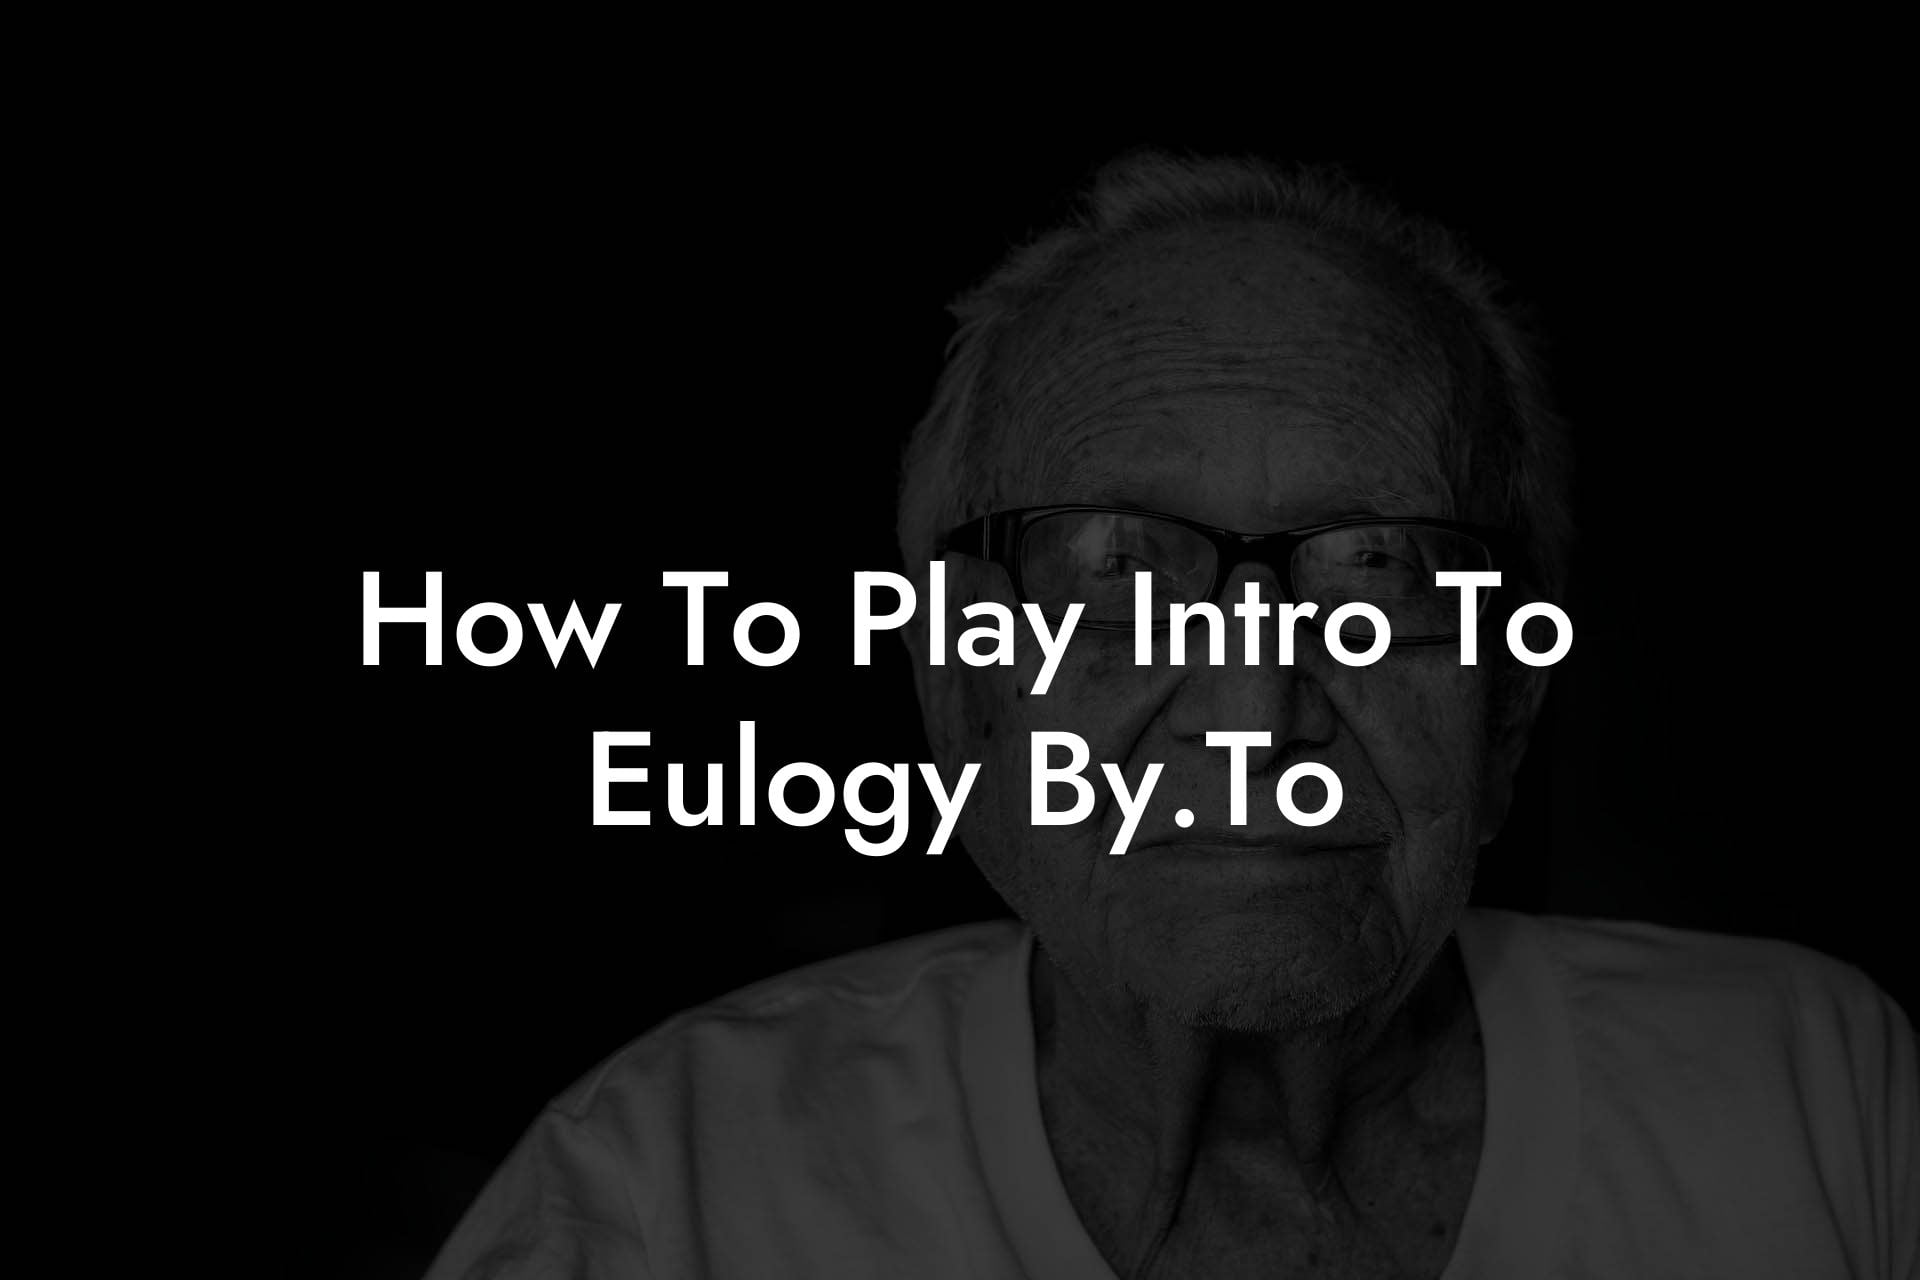 How To Play Intro To Eulogy By.To